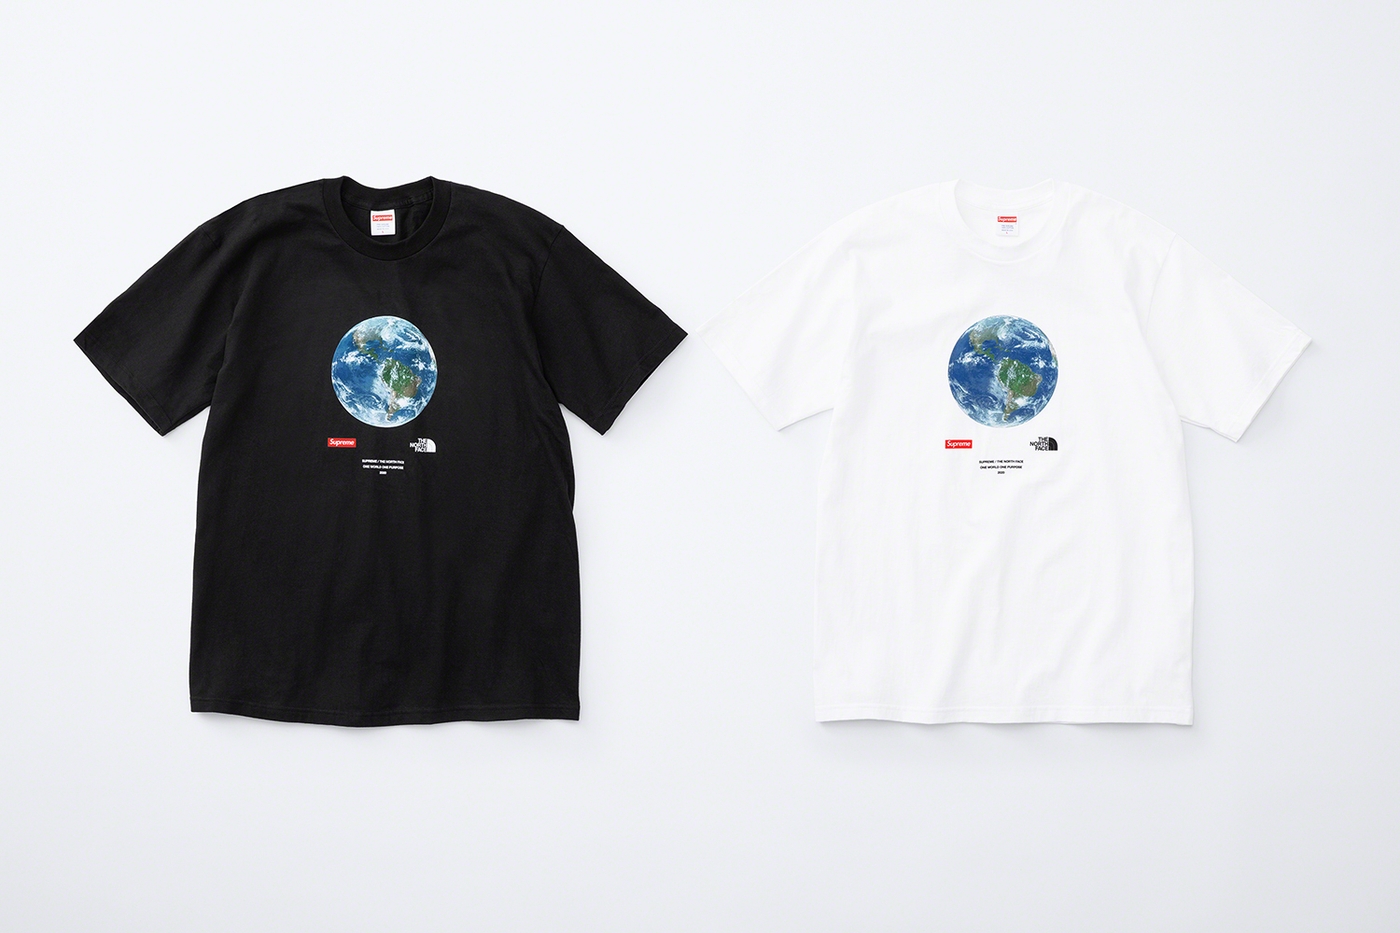 One World Tee. <span class="red">Supreme and The North Face® will donate 100% of profits from One World Tee sales to <a target="_blank" href="https://www.globalgiving.org/projects/coronavirus-relief-fund/"><u>GlobalGiving’s Coronavirus Relief Fund</u></a>, providing resources to communities on the front lines and protecting the most vulnerable. </span> (33/39)